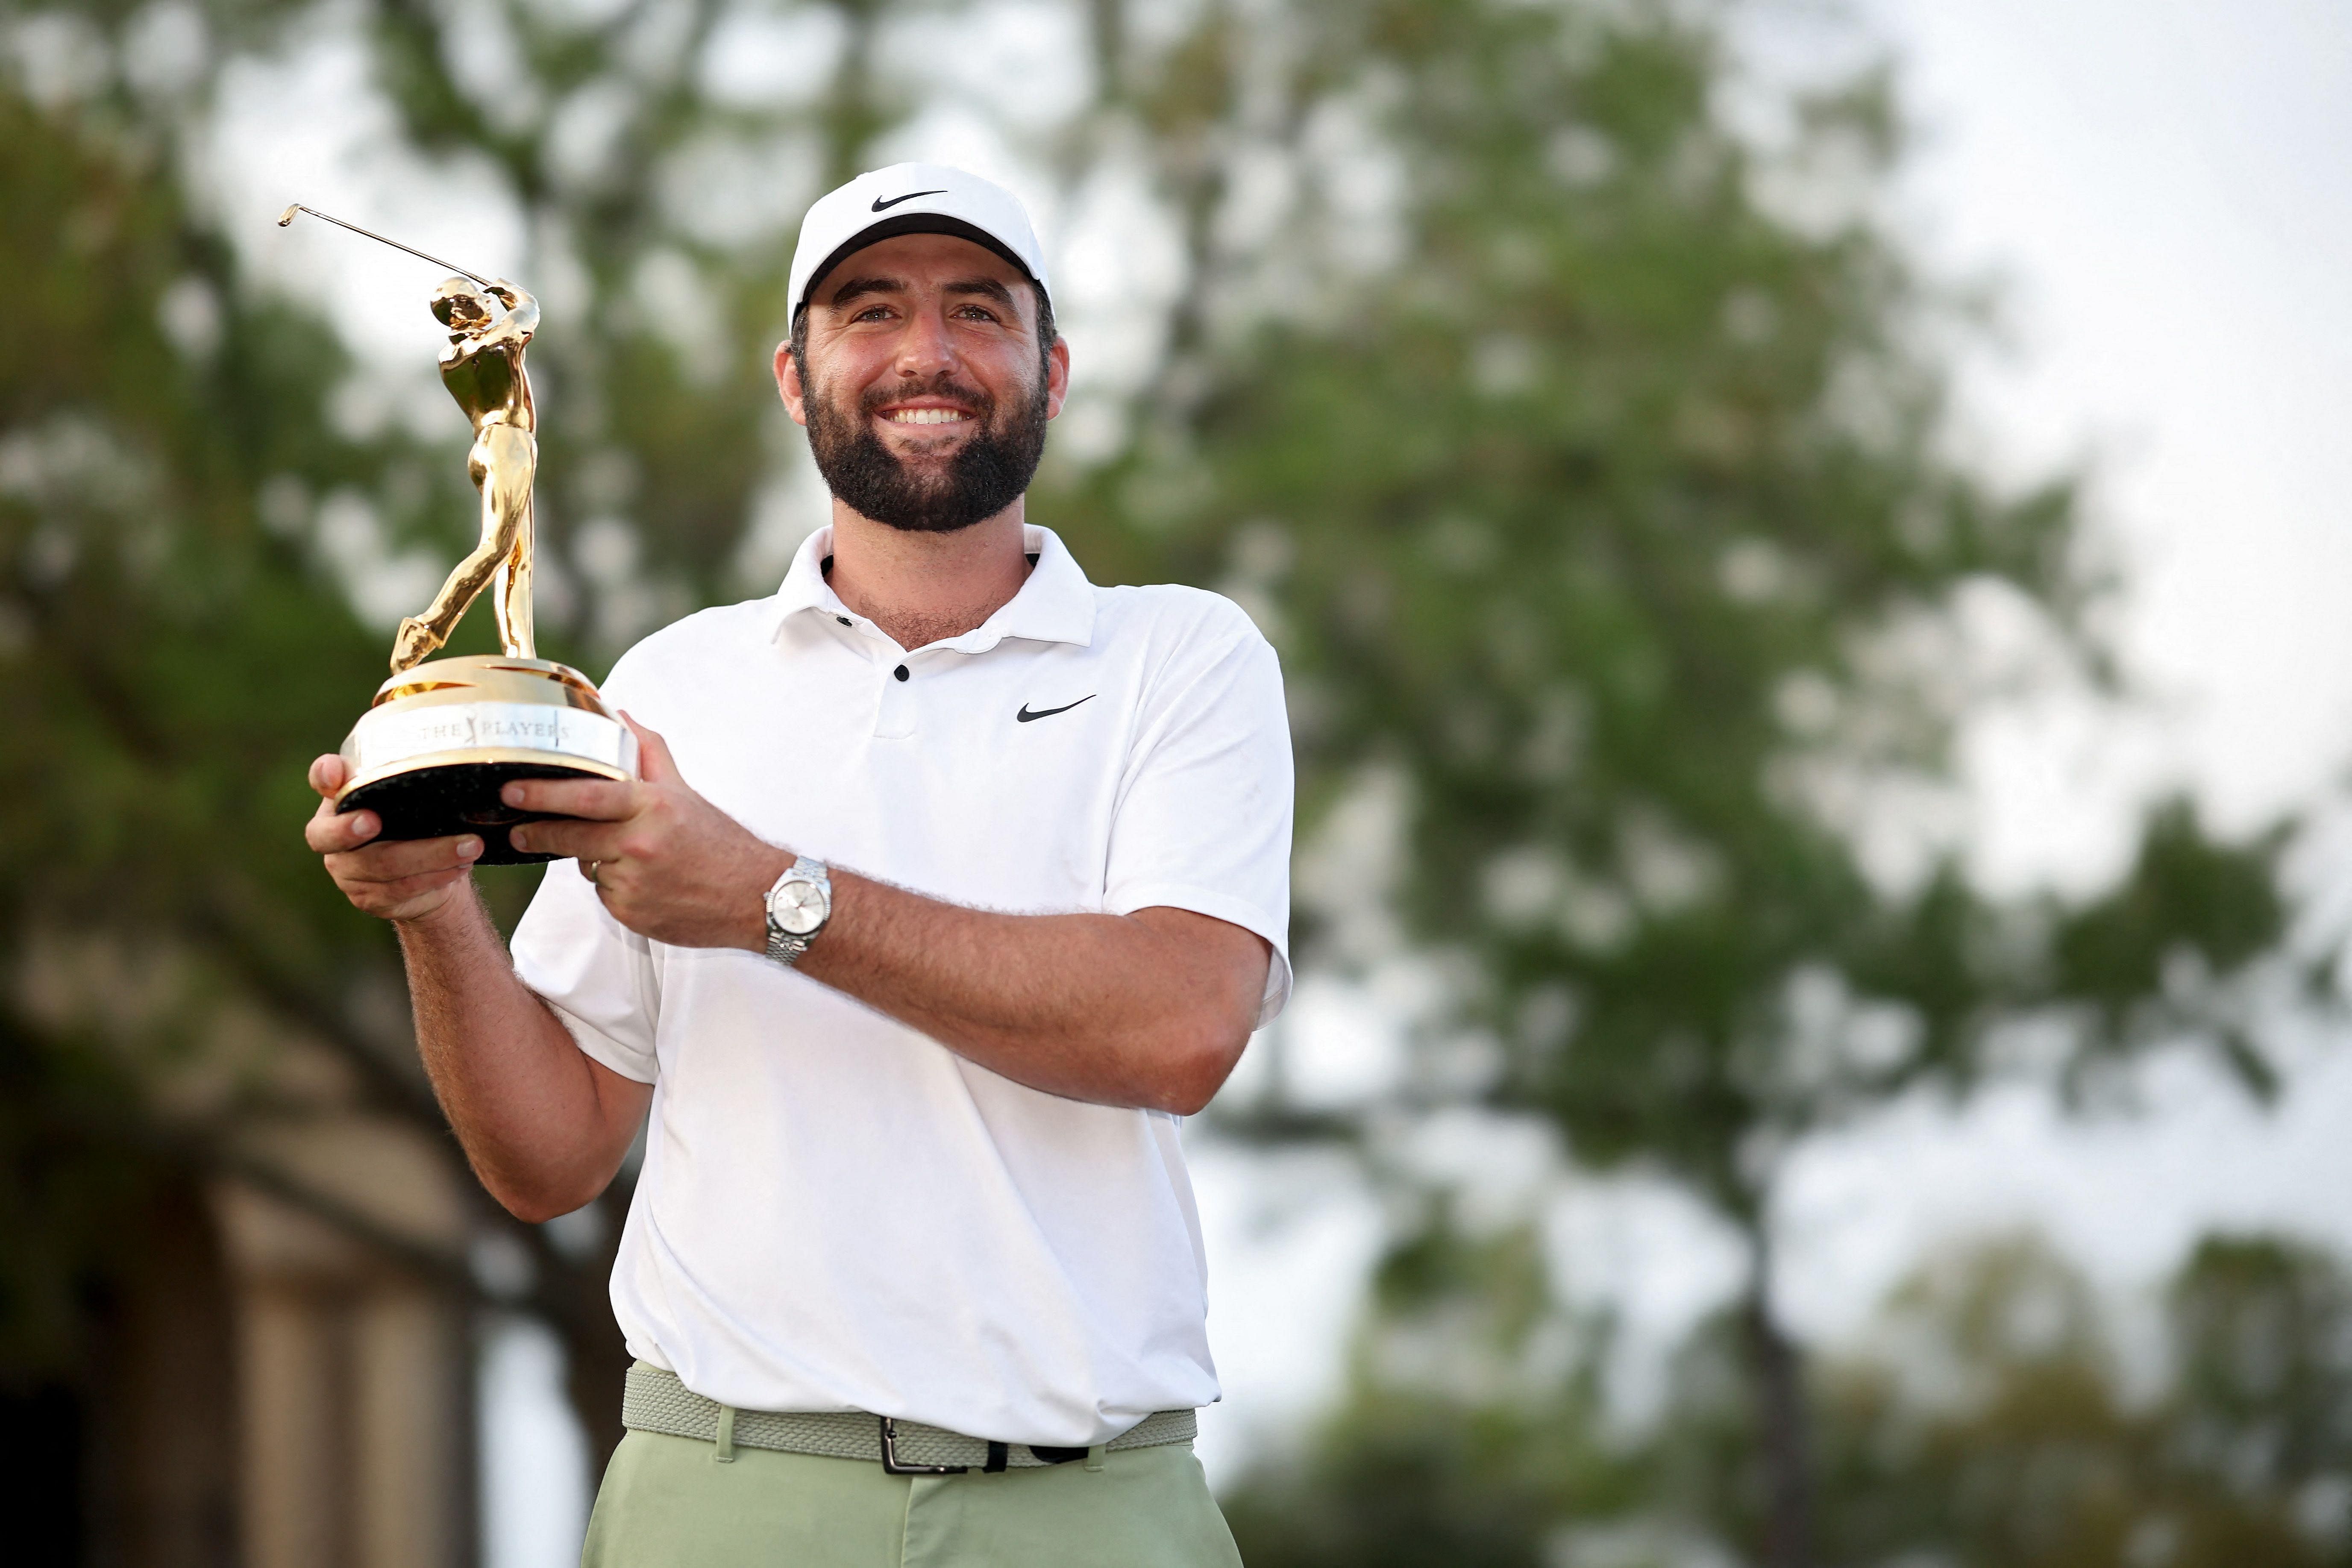 Golfer Scottie Scheffler becomes first back-to-back winner at The Players Championship